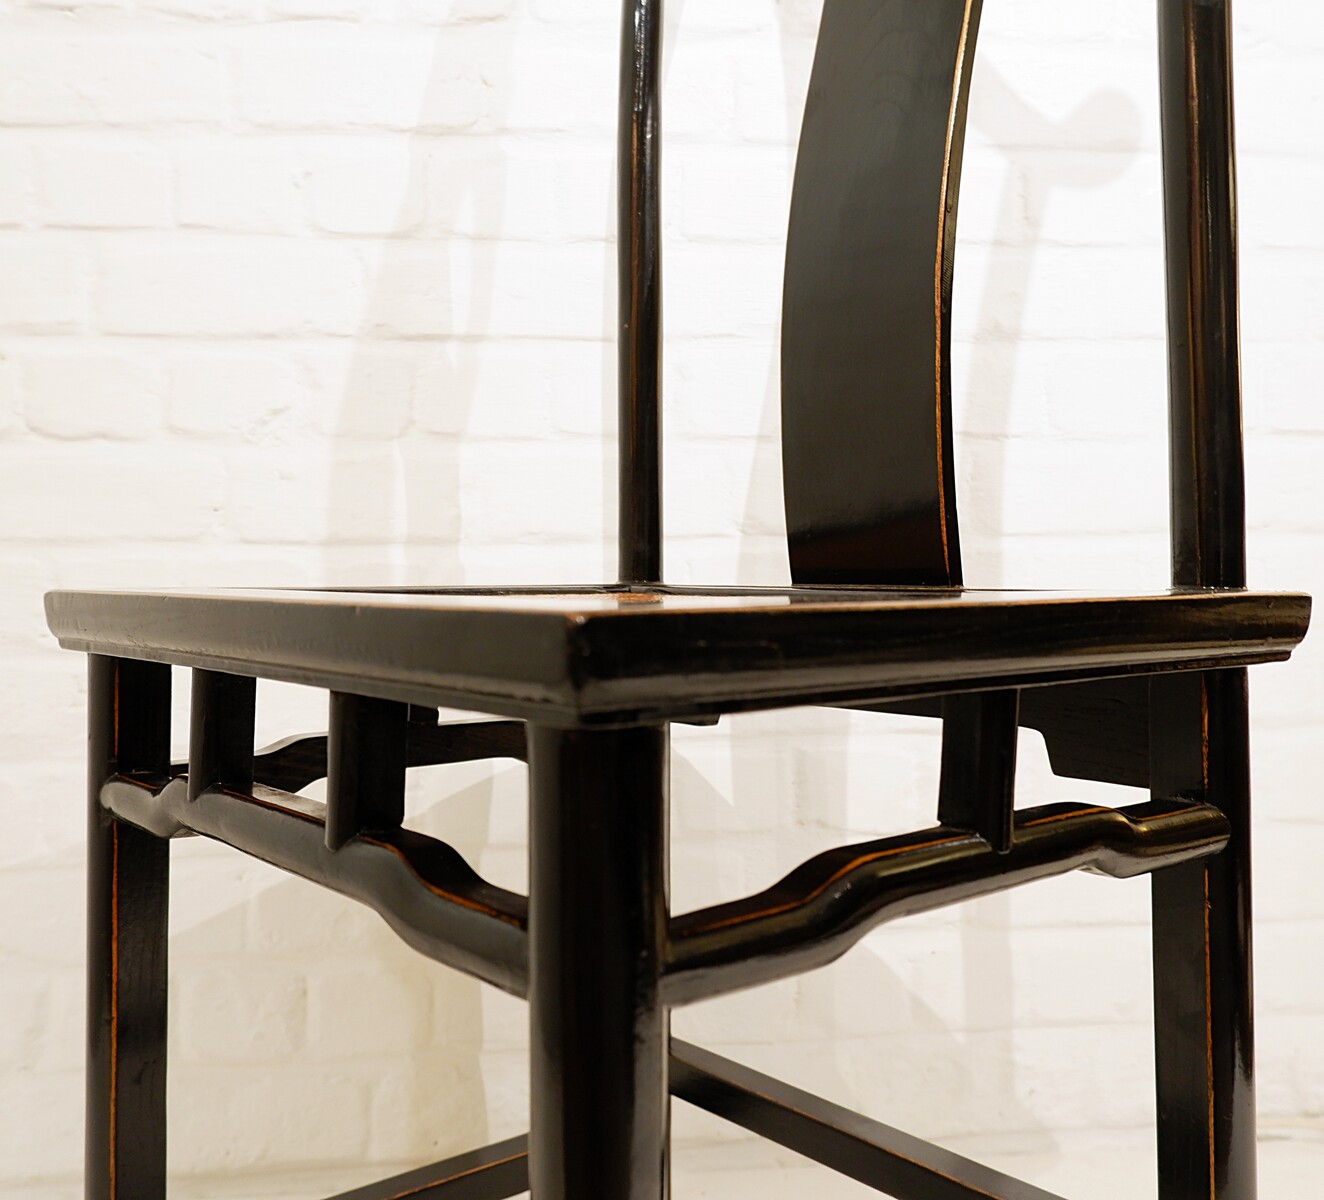 Set of 6 Chinese chairs in black lacquered wood